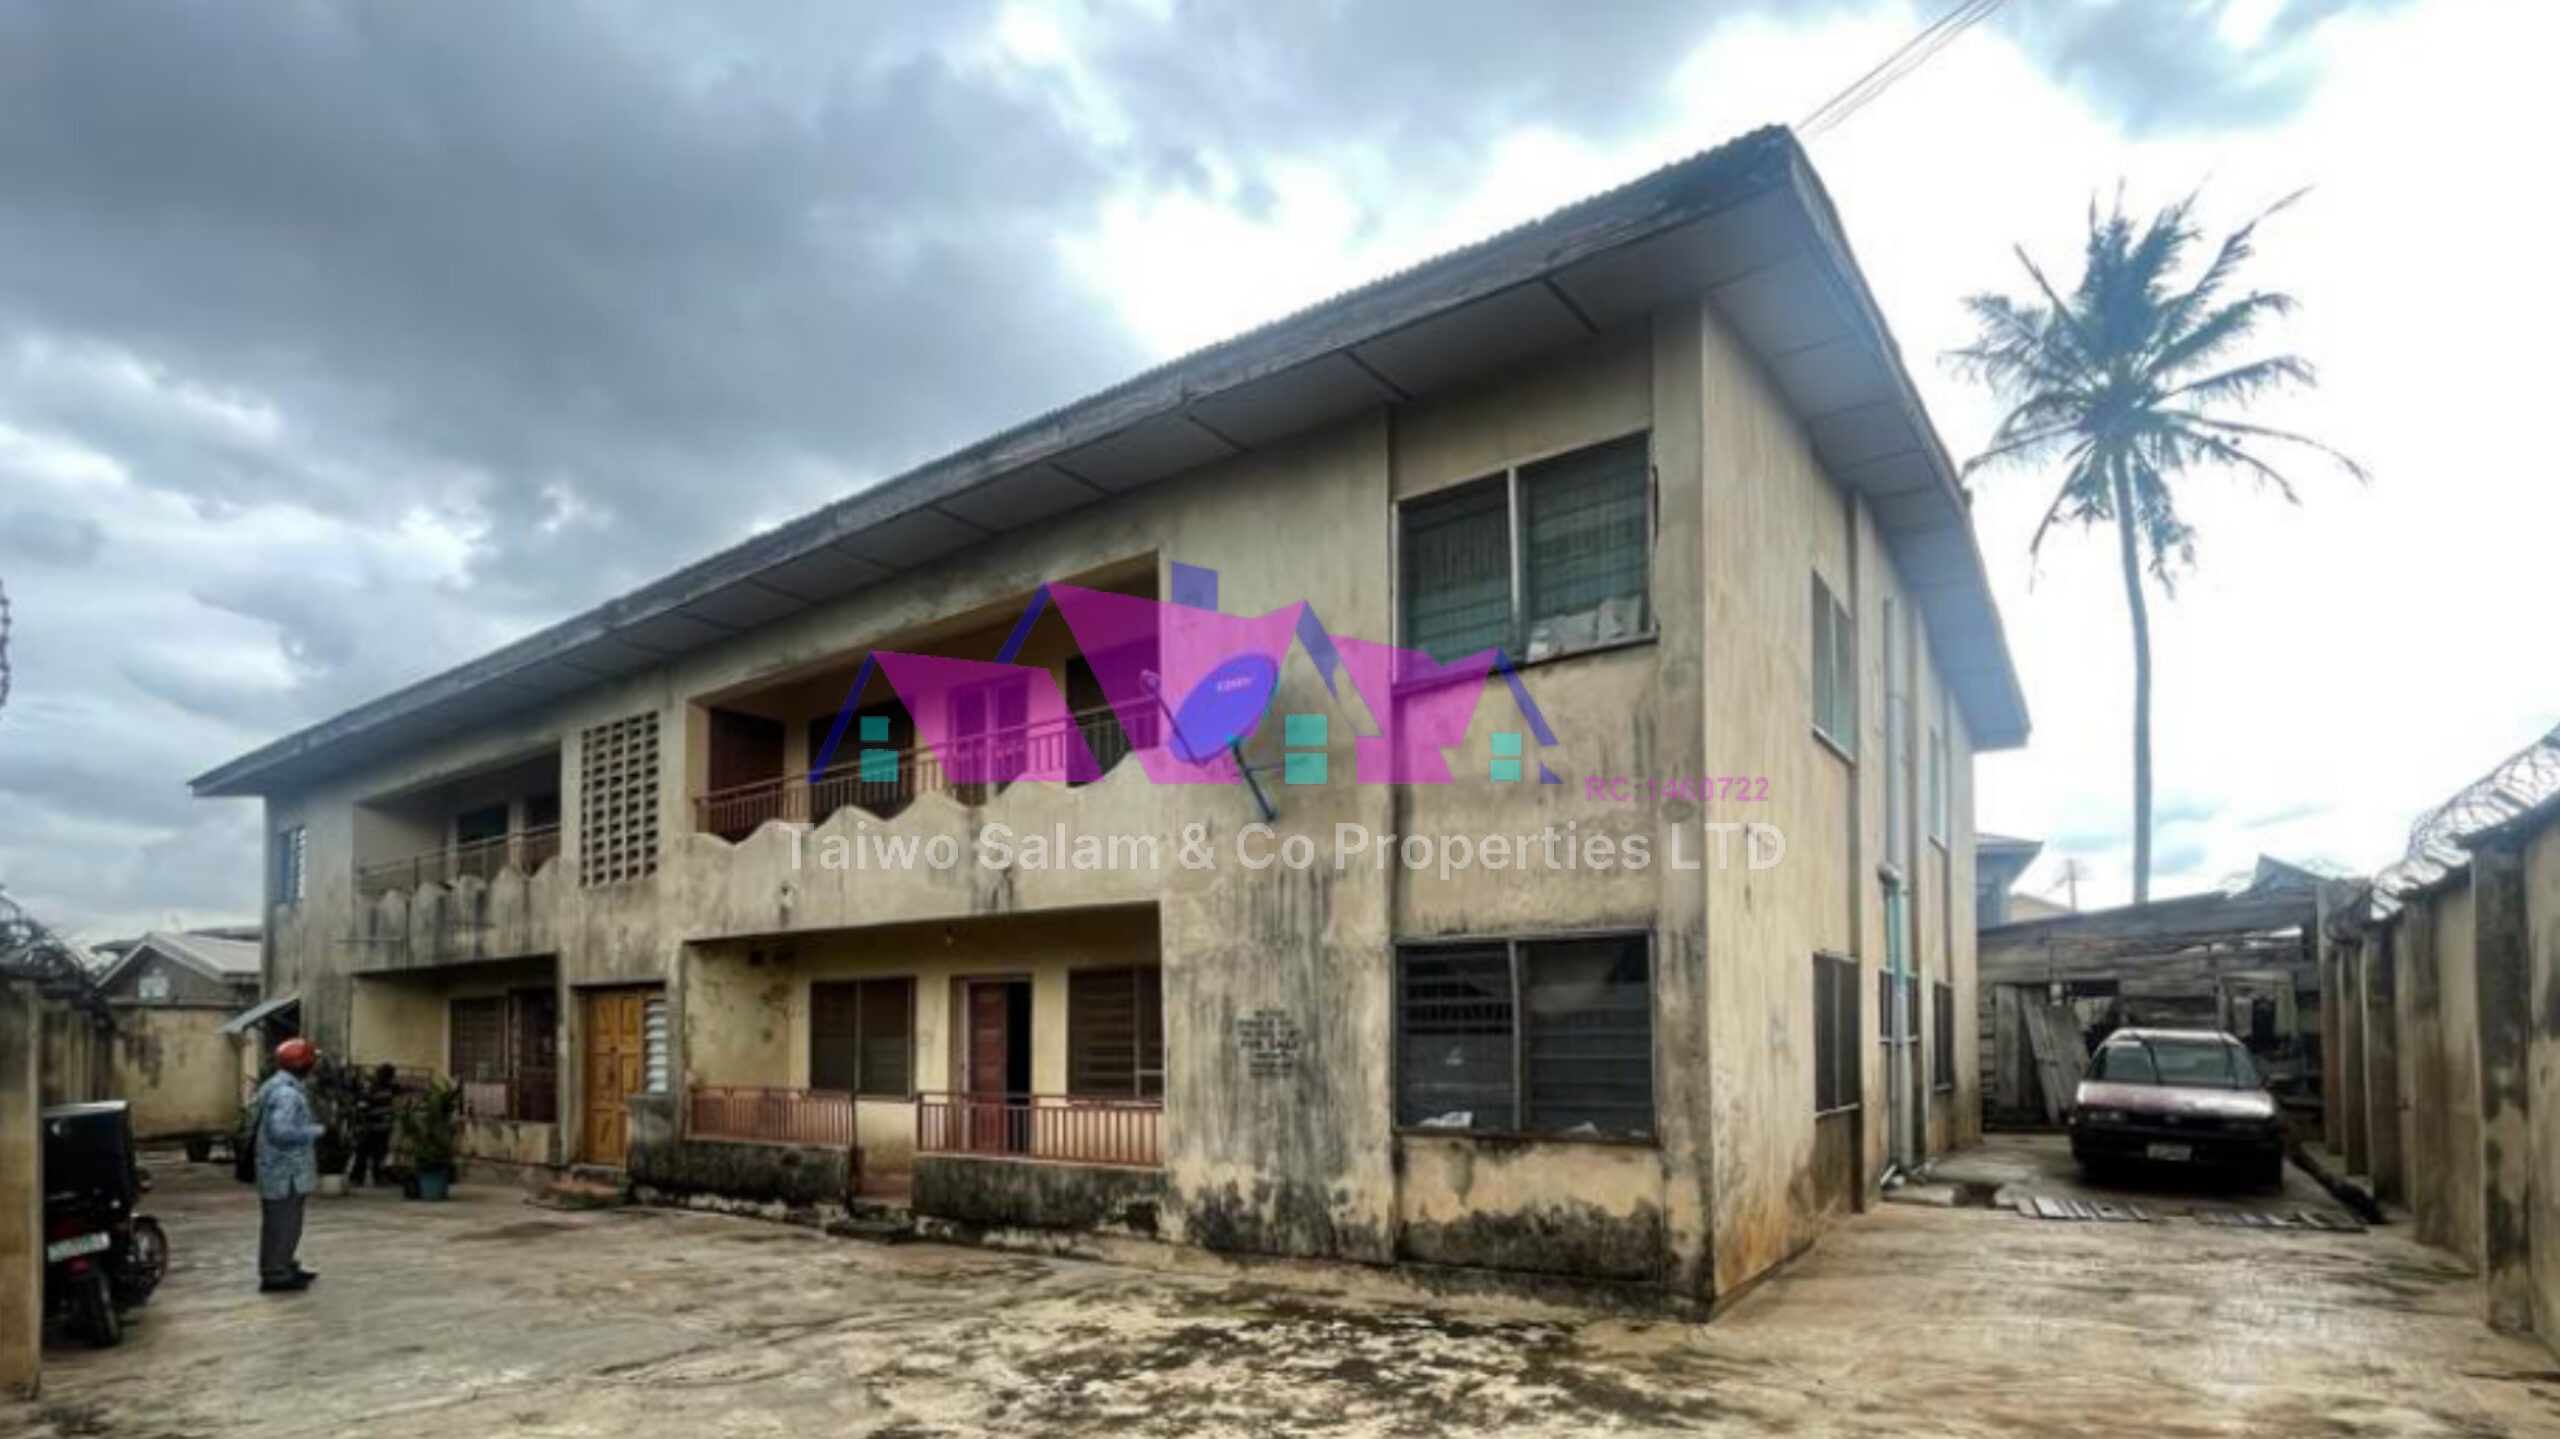 4 flat of 3 bedroom on 800sqm at agbowo area of ibadan